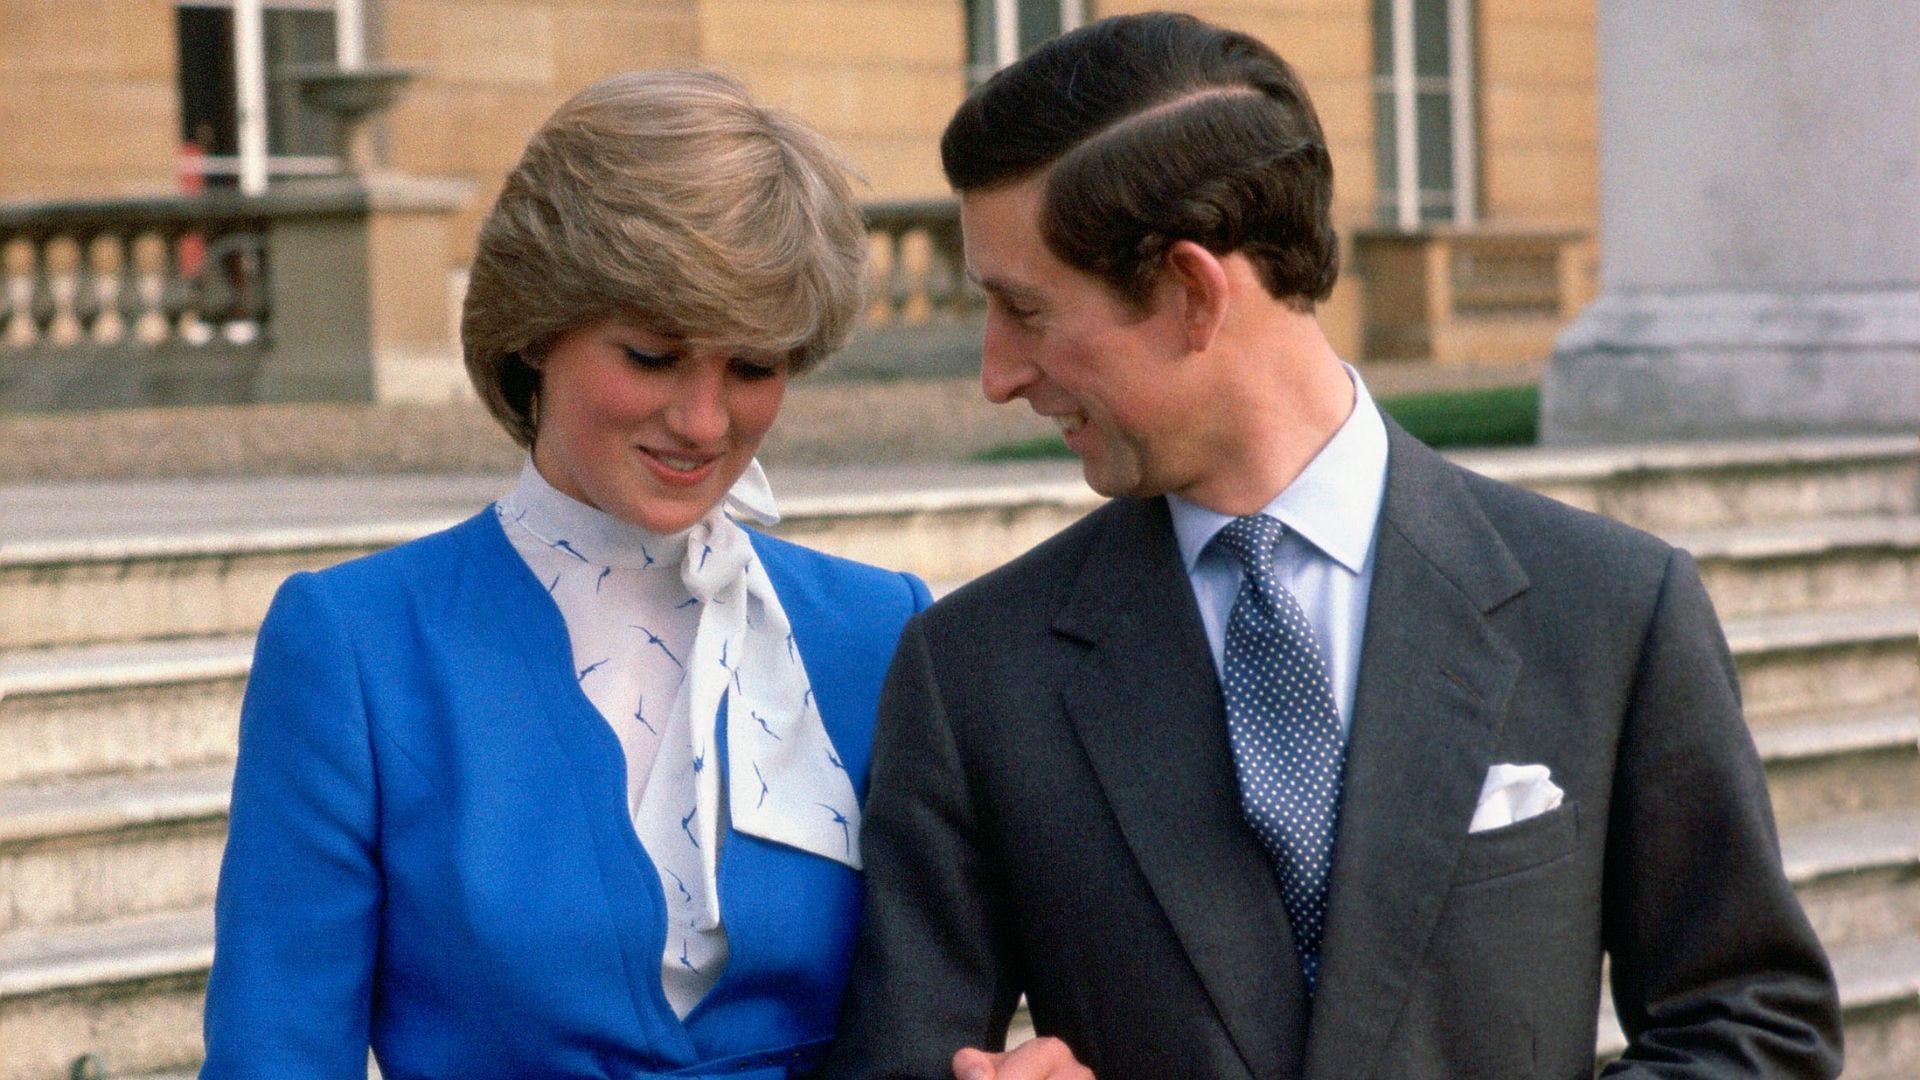 <p>                     Princess Diana and Prince Charles, as he was then known, were famously married on 29th July 1981 at St. Paul’s Cathedral. And while the couple's early history is fairly complex (reports suggest that they only met in person 13 times before getting engaged), one of the most interesting nuggets of information of Charles and Diana's relationship timeline is that Charles was originally dating Diana’s sister when they first met. In fact, she is the one who introduced the royal couple to one another!                   </p>                                      <p>                     In 1997, Charles was said to be seeing Diana’s sister Lady Sarah Spencer, or Sarah McCorquodale, as she is now known. The pair weren't believed to be too serious, but they ended up breaking off their relationship after she told the press that she didn’t see herself marrying Charles.                   </p>